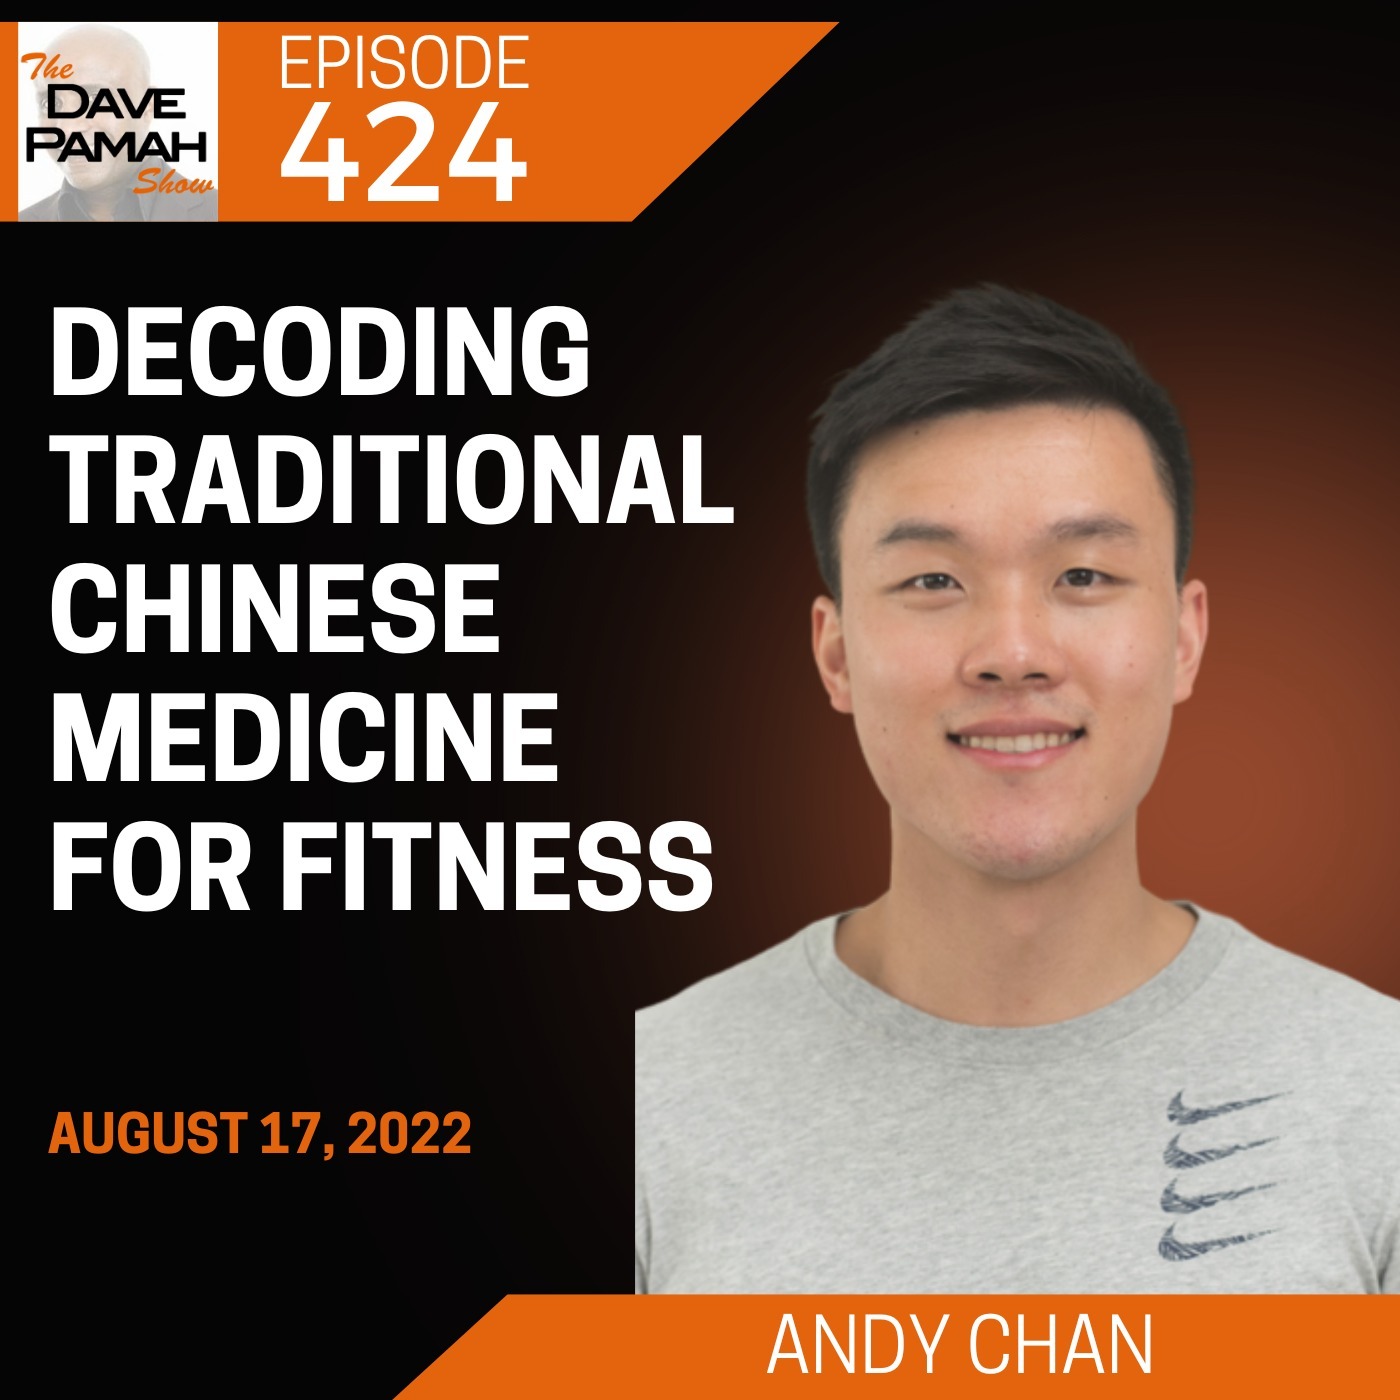 Decoding traditional Chinese medicine for fitness with Andy Chan